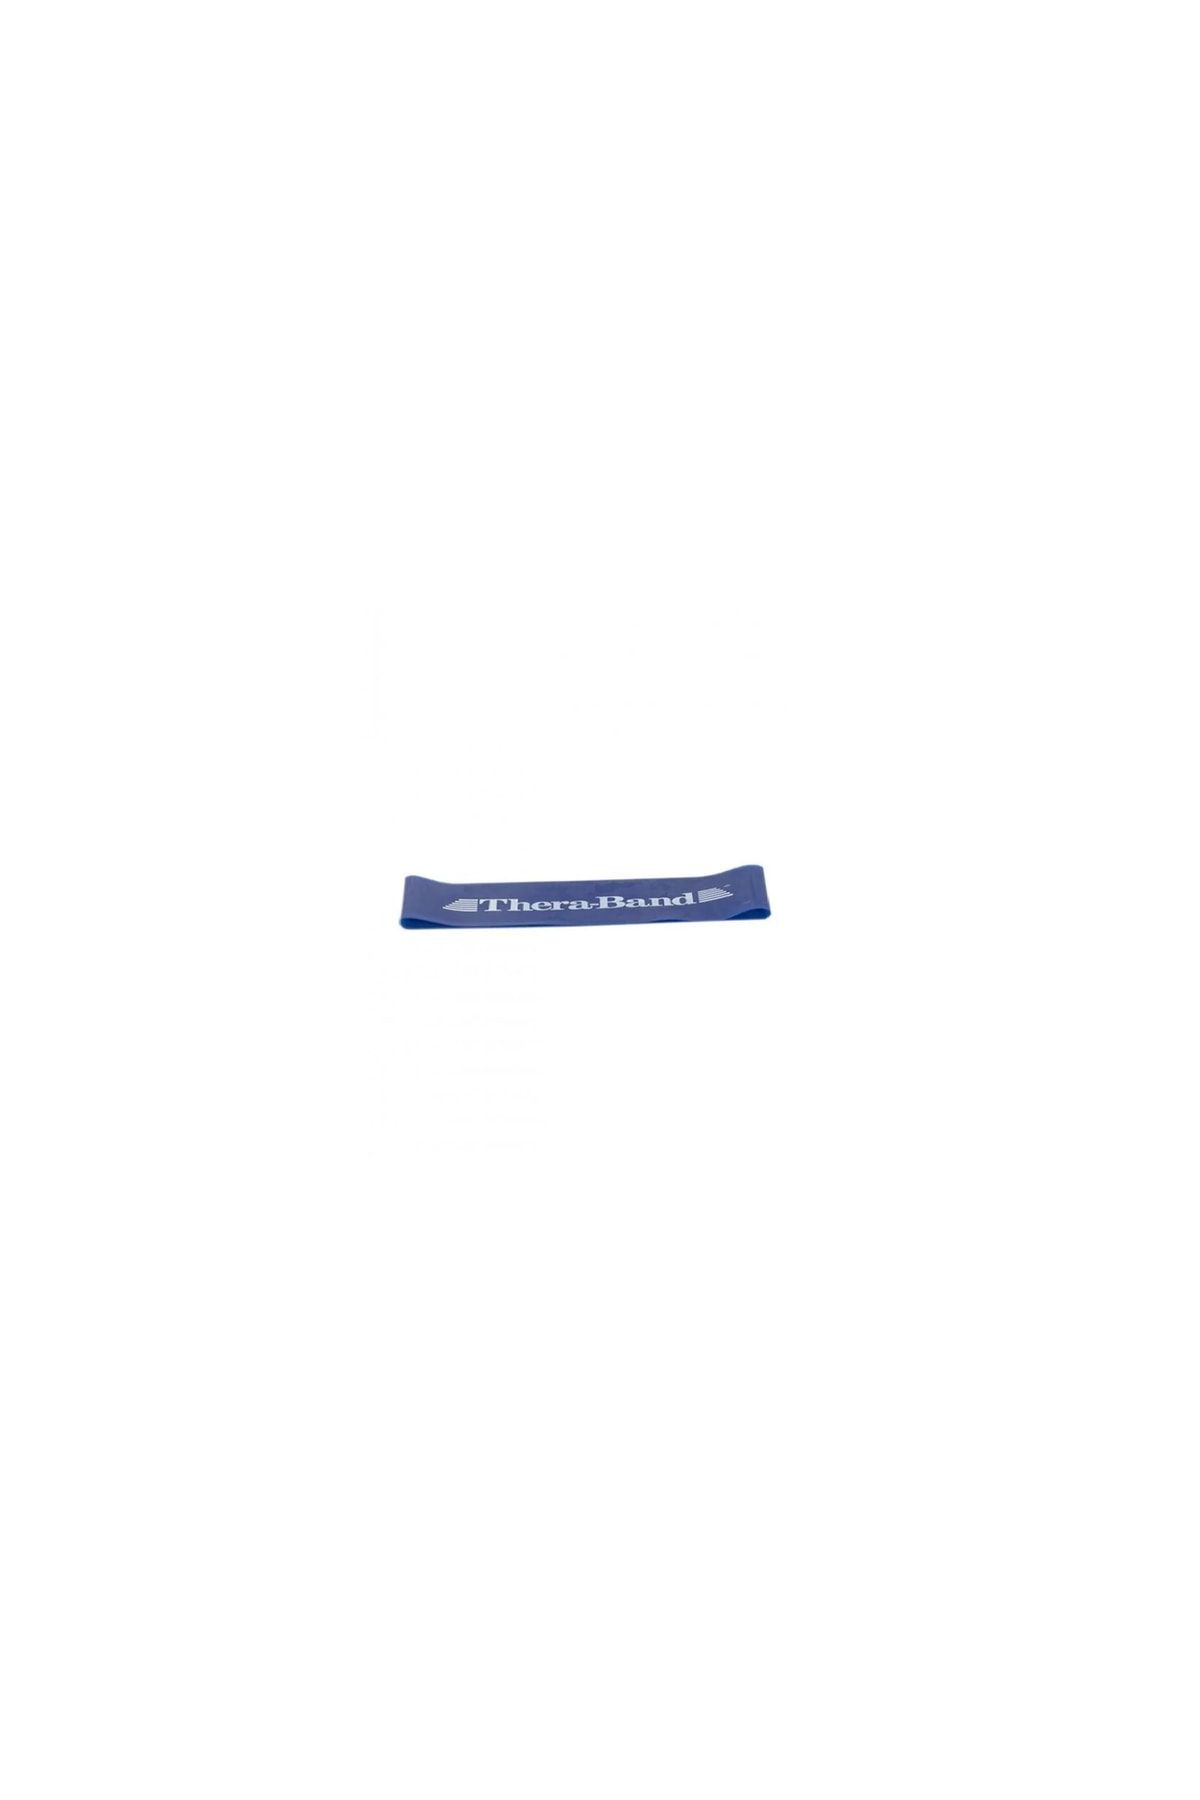 Theraband ® Professional Resistance Band Loops 7,6 Cm X 45,5 Cm / Blue